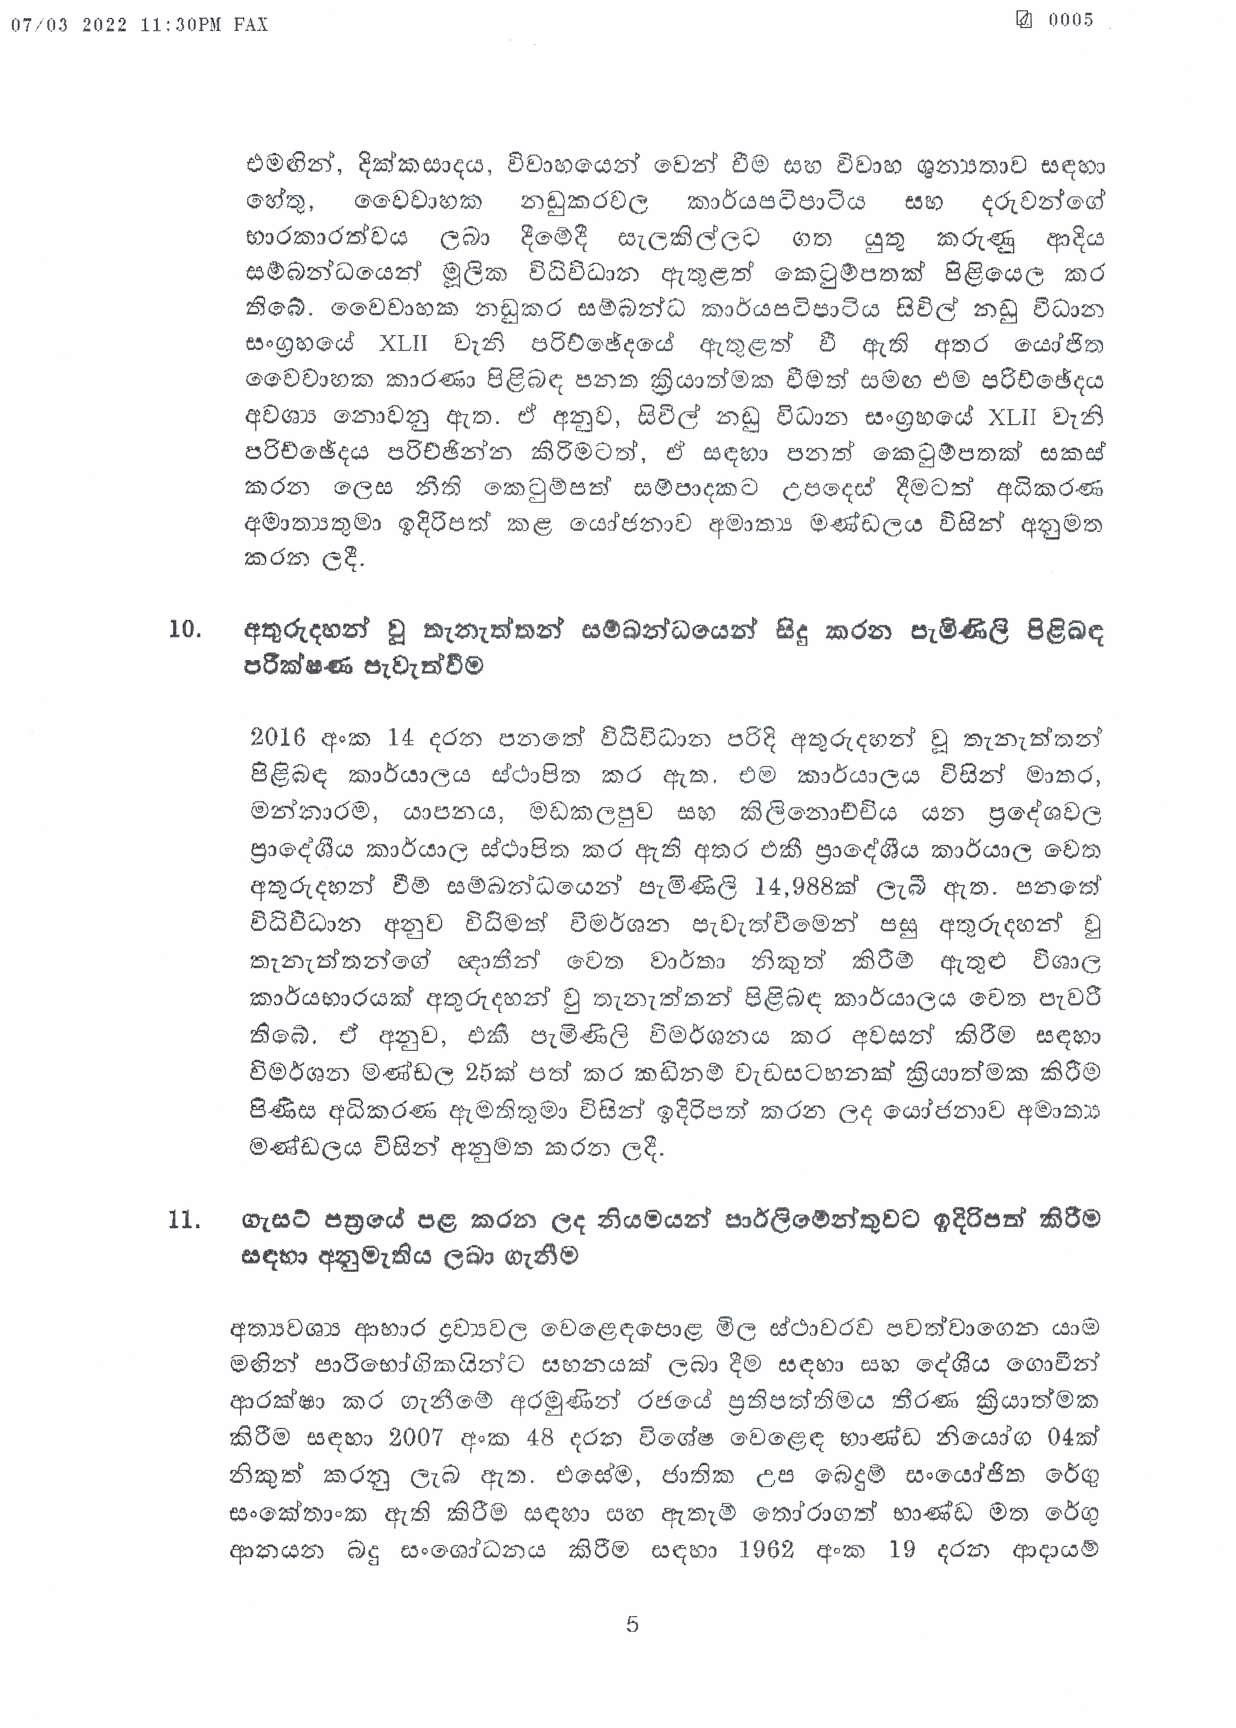 Cabinet Decision on 07.03.2022 page 005